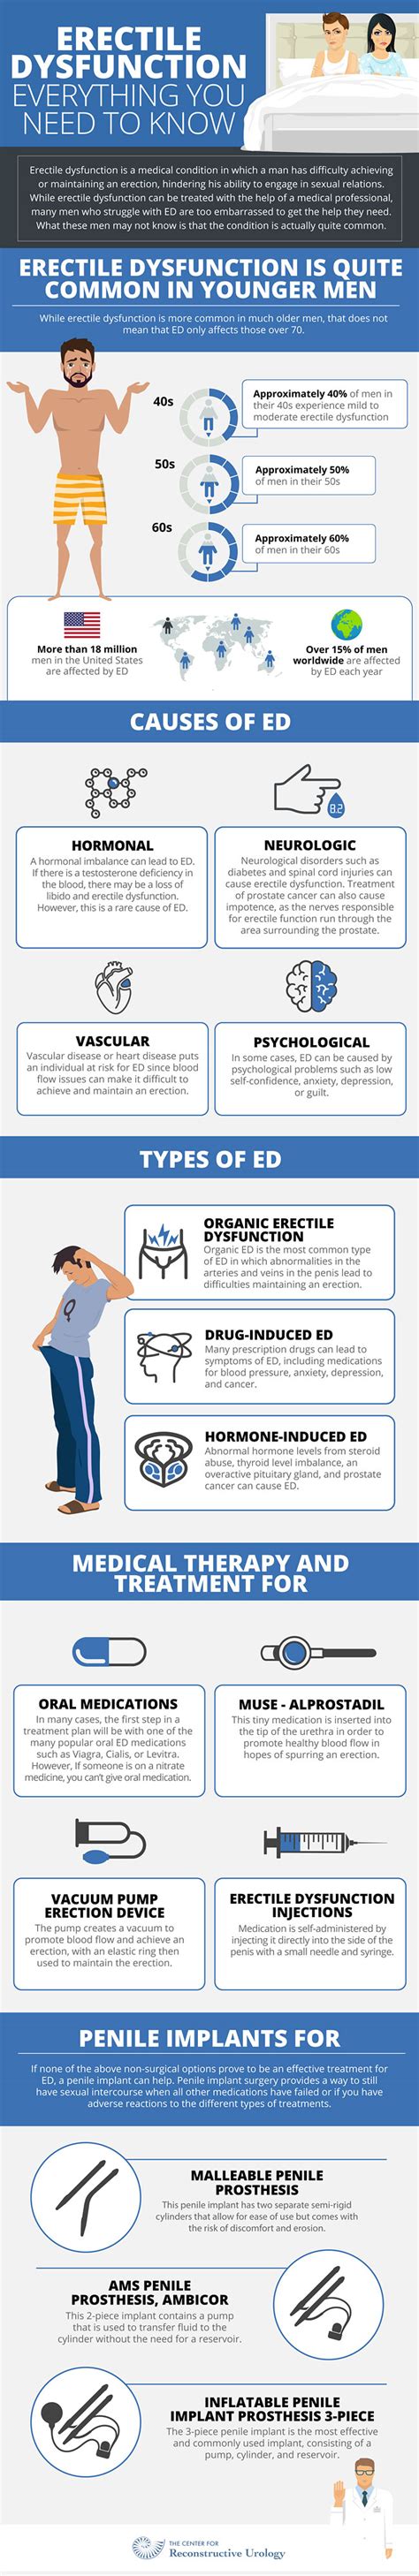 Erectile Dysfunction Infographic The Center For Reconstructive Urology